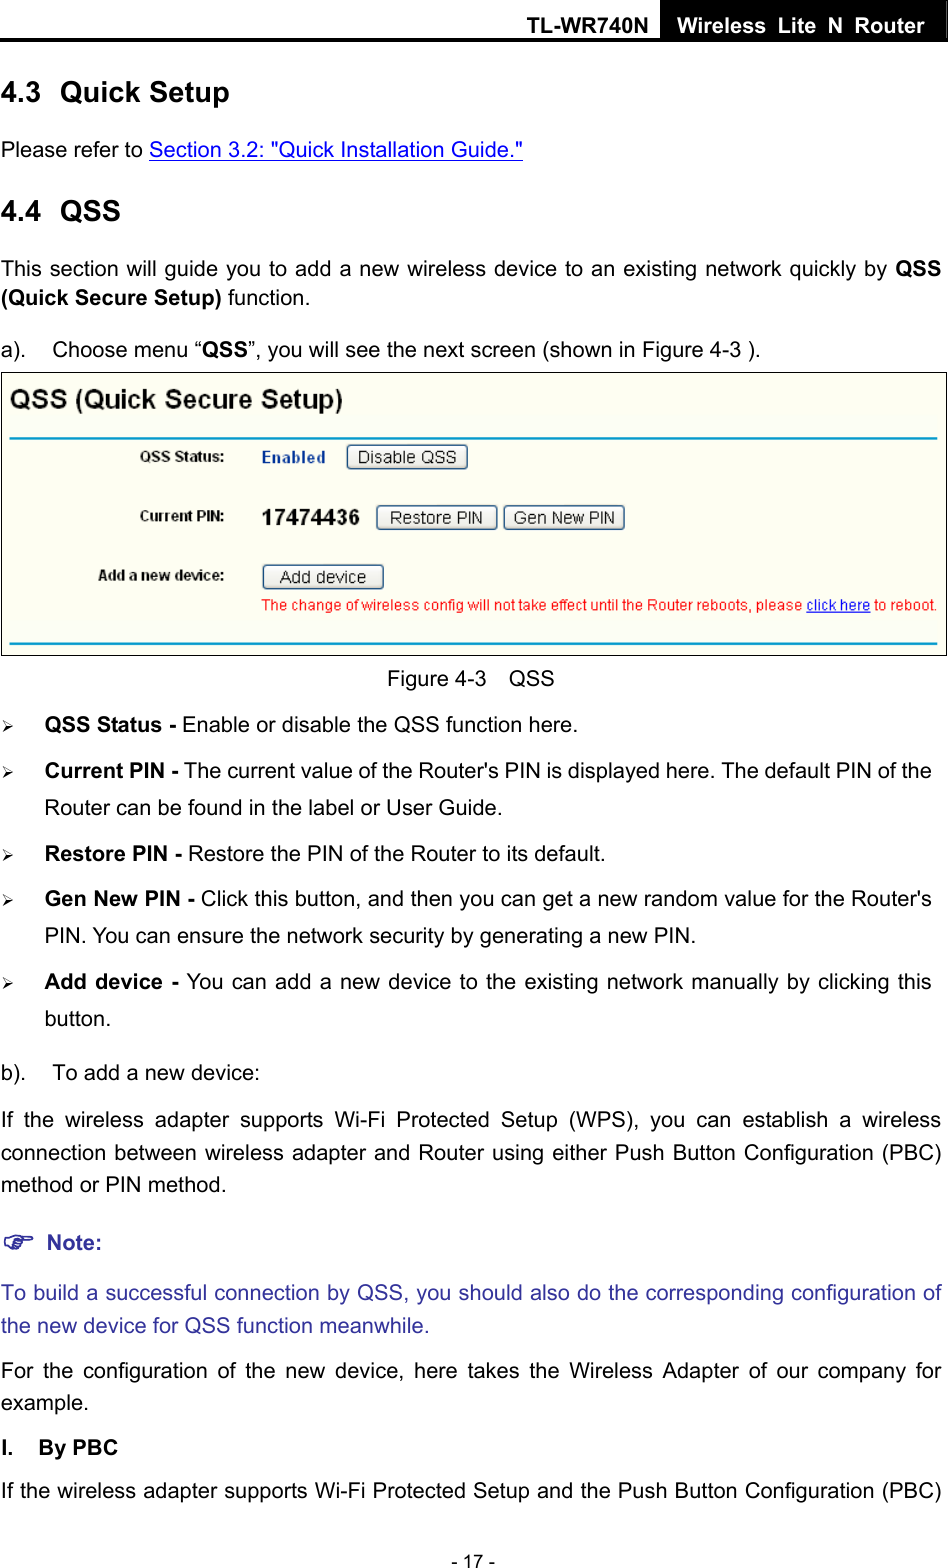 TL-WR740N Wireless Lite N Router  - 17 - 4.3  Quick Setup Please refer to Section 3.2: &quot;Quick Installation Guide.&quot; 4.4  QSS This section will guide you to add a new wireless device to an existing network quickly by QSS (Quick Secure Setup) function.   a).  Choose menu “QSS”, you will see the next screen (shown in Figure 4-3 ).    Figure 4-3  QSS ¾ QSS Status - Enable or disable the QSS function here.   ¾ Current PIN - The current value of the Router&apos;s PIN is displayed here. The default PIN of the Router can be found in the label or User Guide.   ¾ Restore PIN - Restore the PIN of the Router to its default.   ¾ Gen New PIN - Click this button, and then you can get a new random value for the Router&apos;s PIN. You can ensure the network security by generating a new PIN.   ¾ Add device - You can add a new device to the existing network manually by clicking this button.  b).  To add a new device: If the wireless adapter supports Wi-Fi Protected Setup (WPS), you can establish a wireless connection between wireless adapter and Router using either Push Button Configuration (PBC) method or PIN method. ) Note: To build a successful connection by QSS, you should also do the corresponding configuration of the new device for QSS function meanwhile. For the configuration of the new device, here takes the Wireless Adapter of our company for example. I. By PBC If the wireless adapter supports Wi-Fi Protected Setup and the Push Button Configuration (PBC) 